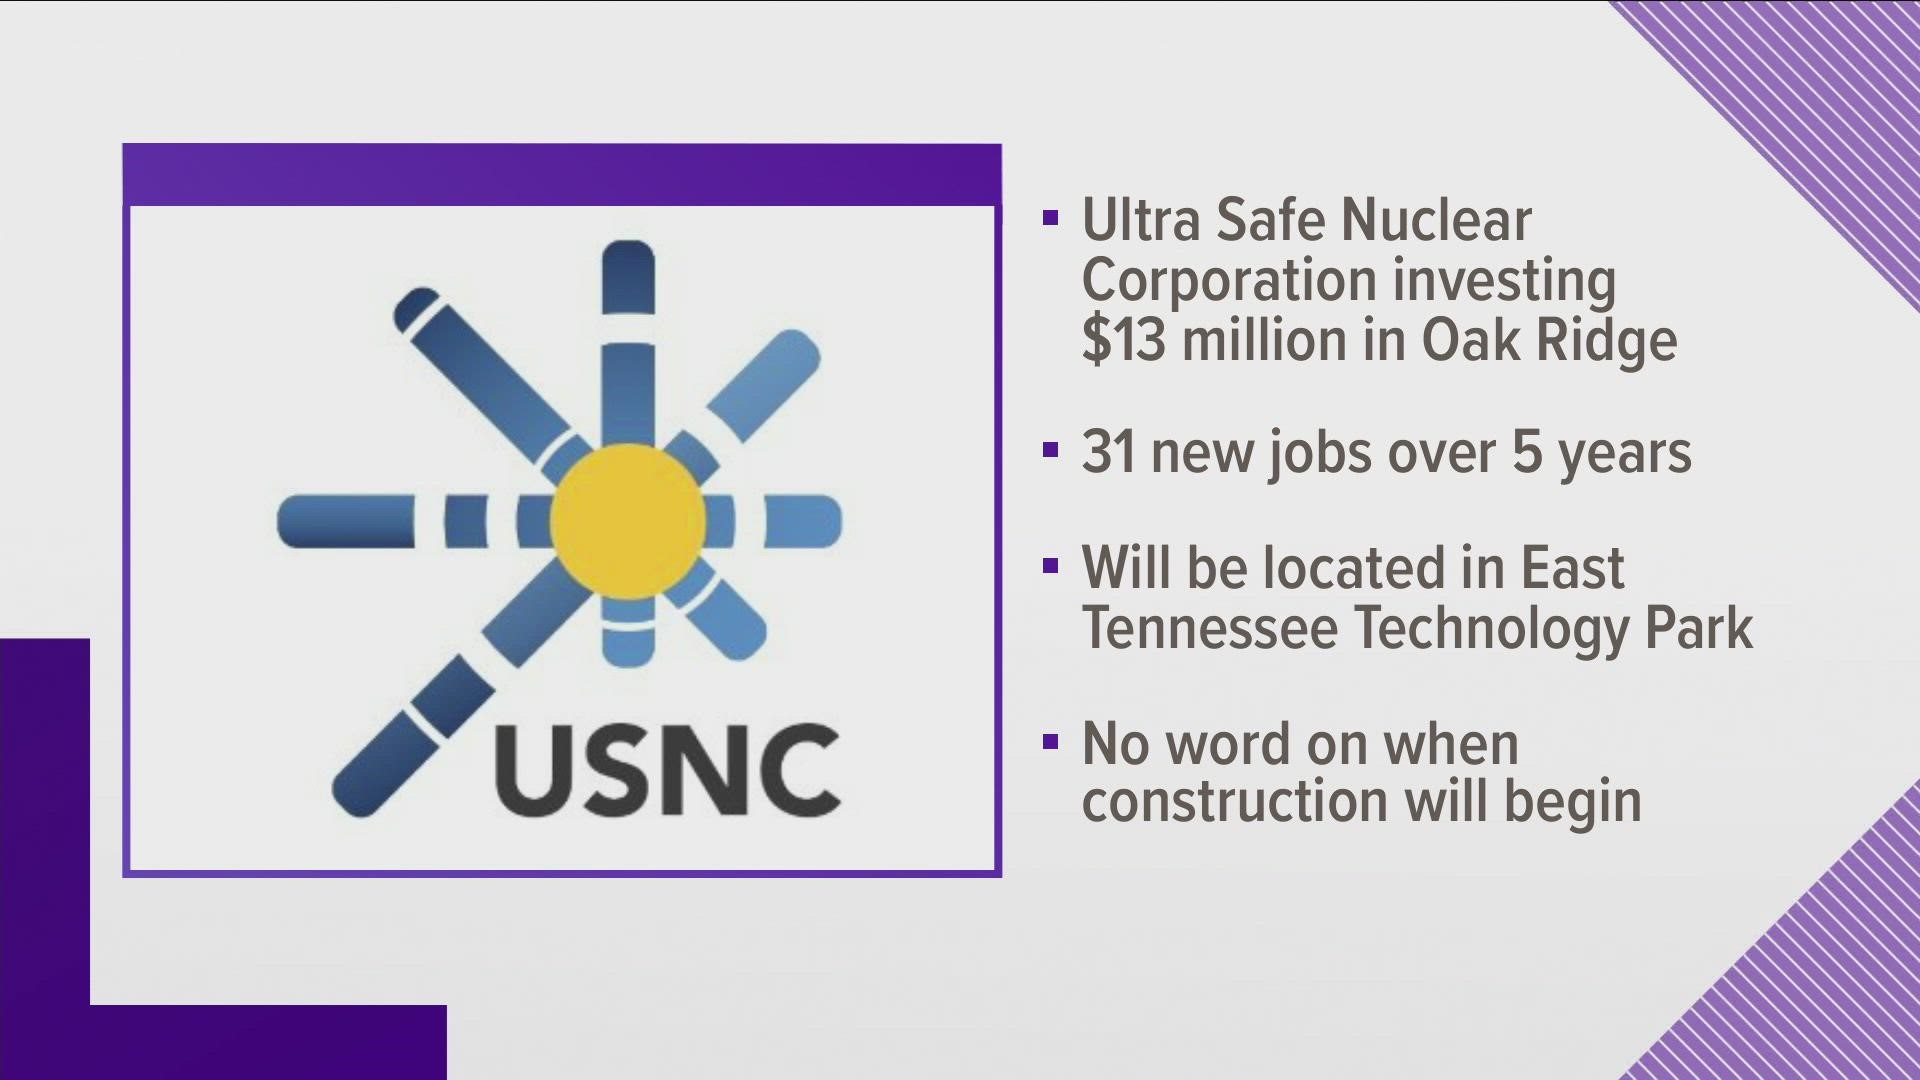 Officials said the Ultra Safe Nuclear Corporation will spend around $13 million to create a new Pilot Fuel Manufacturing facility in Oak Ridge.